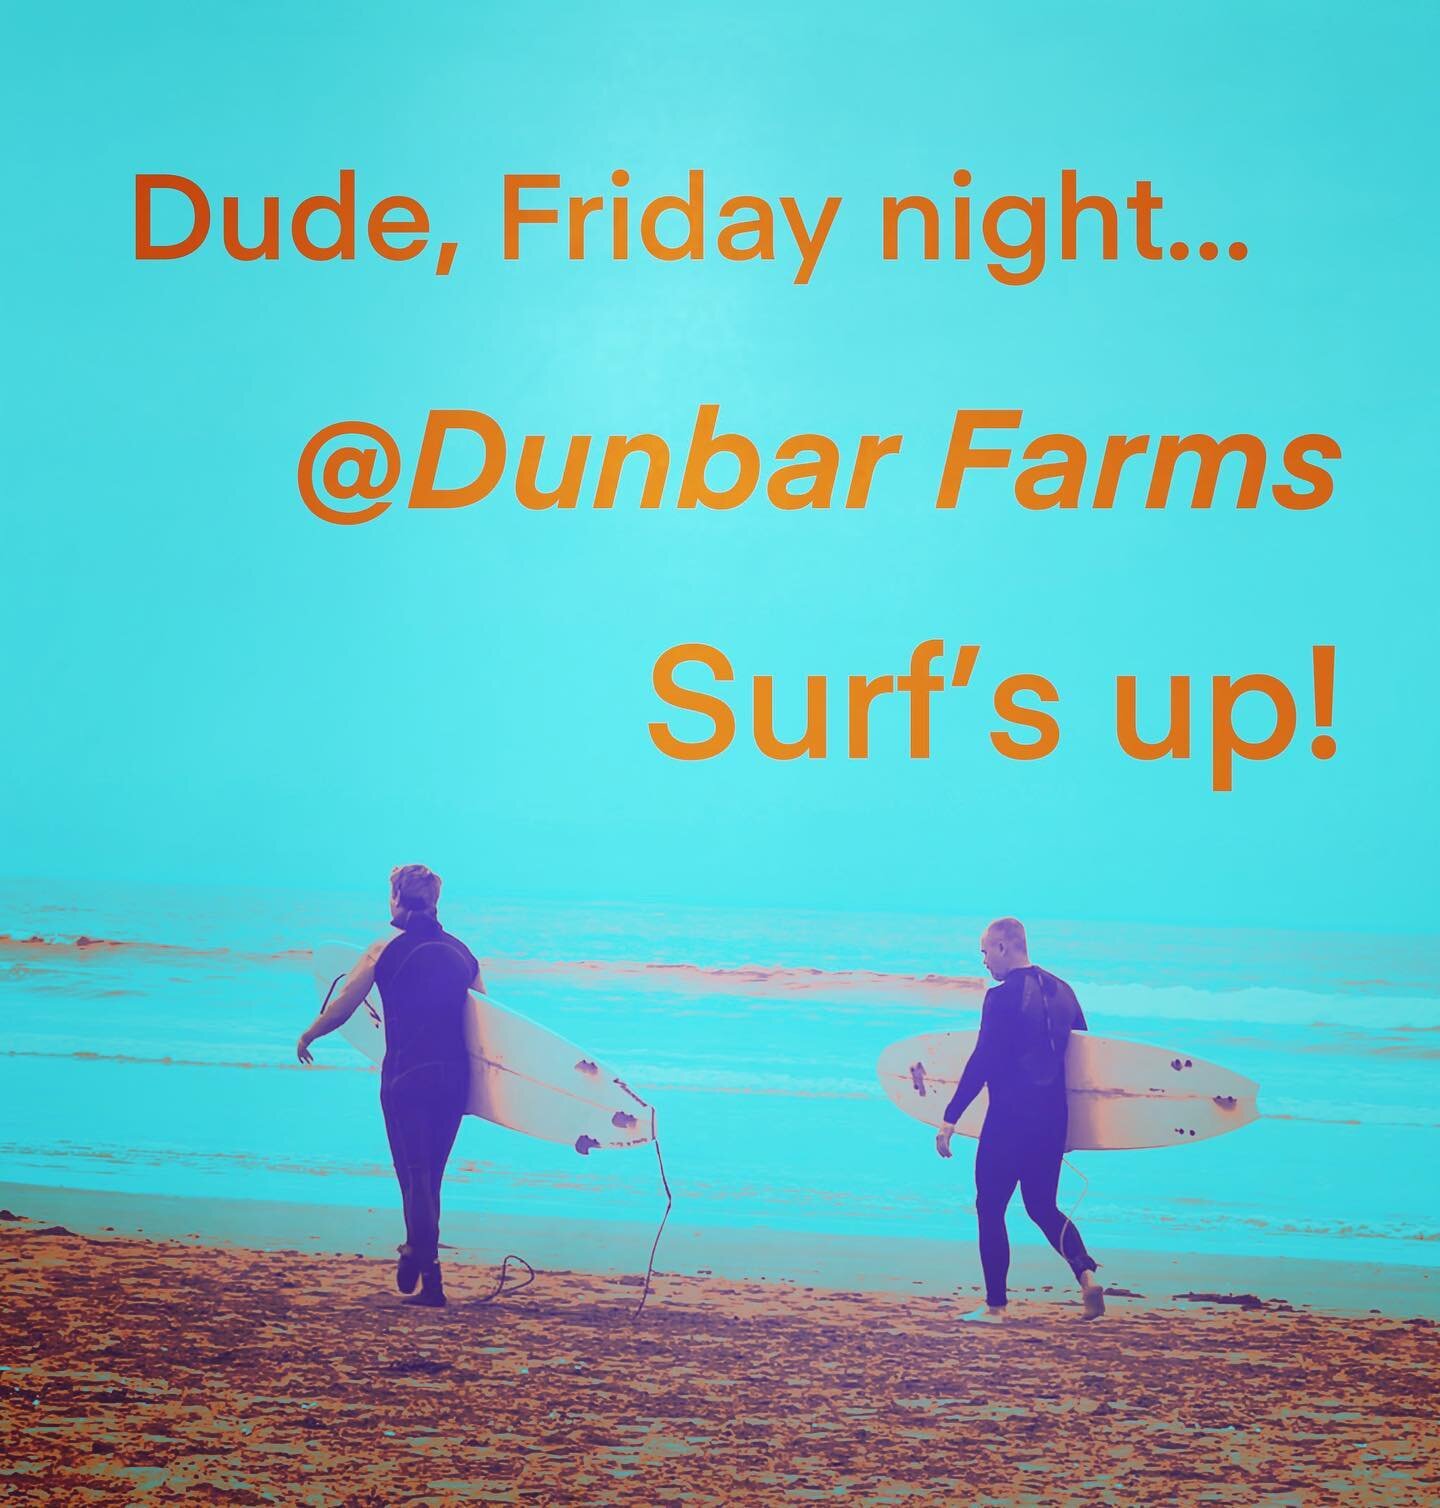 Excited to be back @dunbarfarmsofmedford this Friday 5:30-7:30 pm! #awesomevenue #terrificpeople #greatwineandviews #surfrock #dancingvibes #funtimes